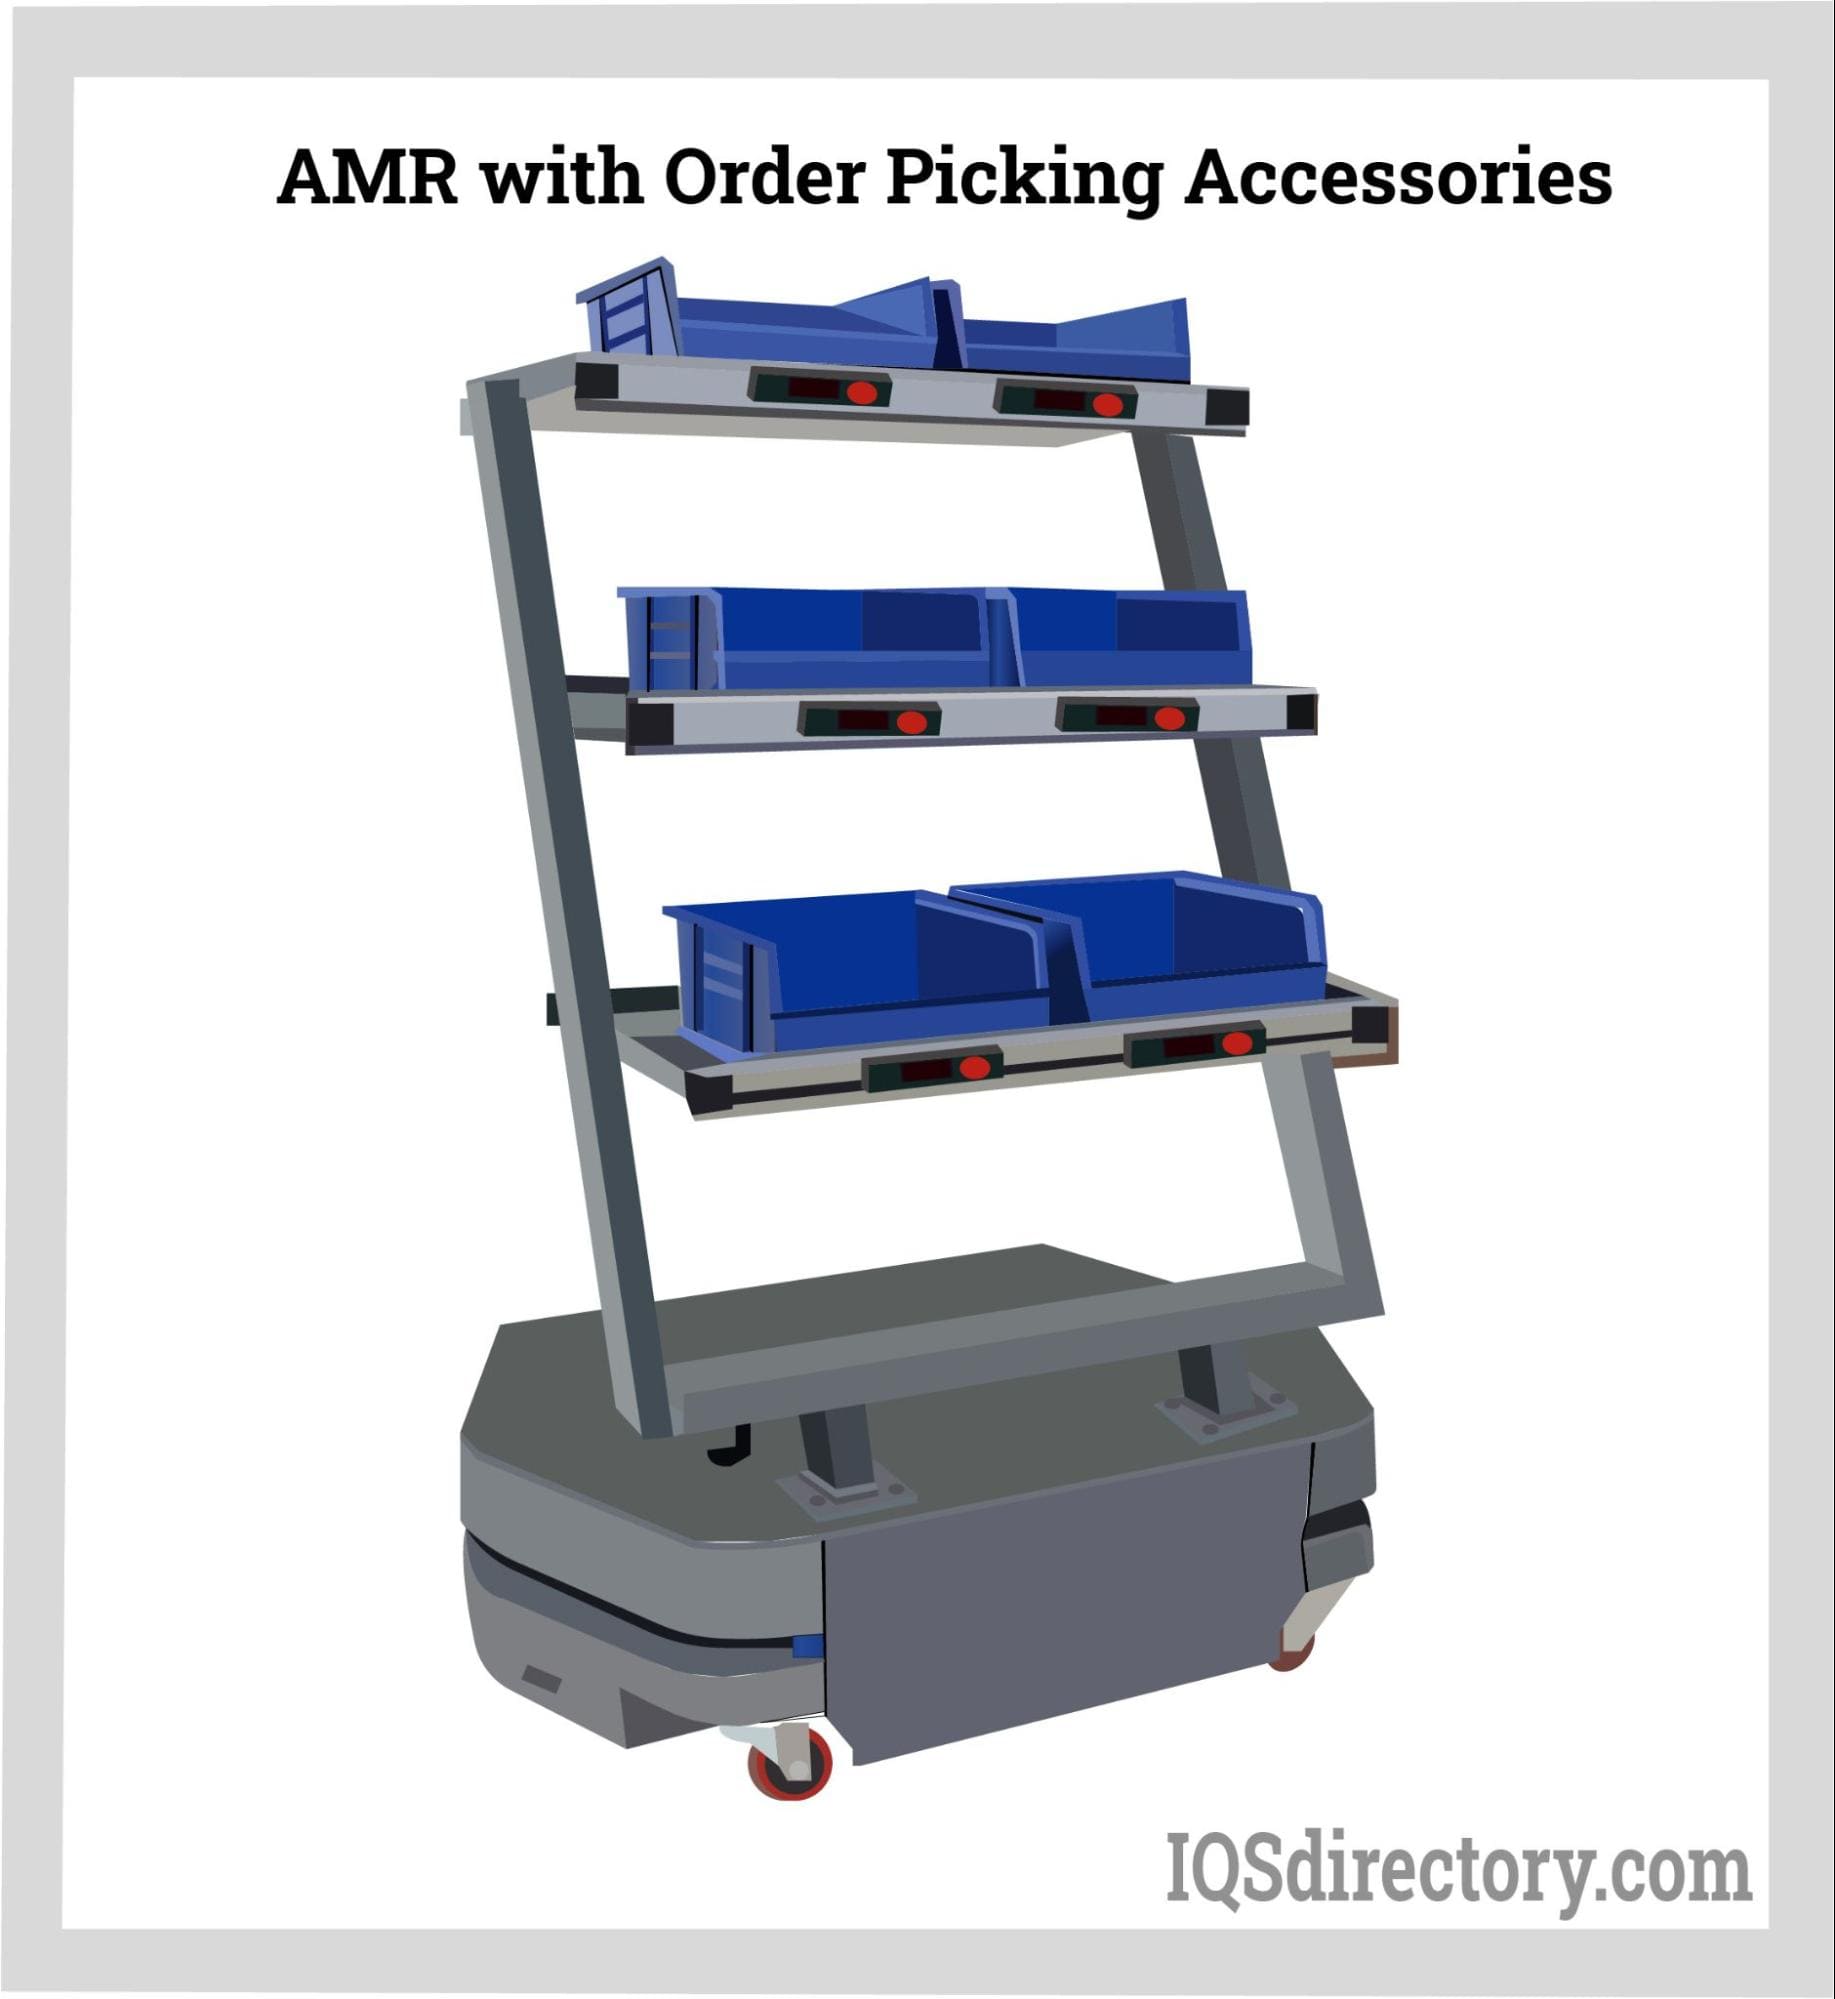 AMR with Order Picking Accessories